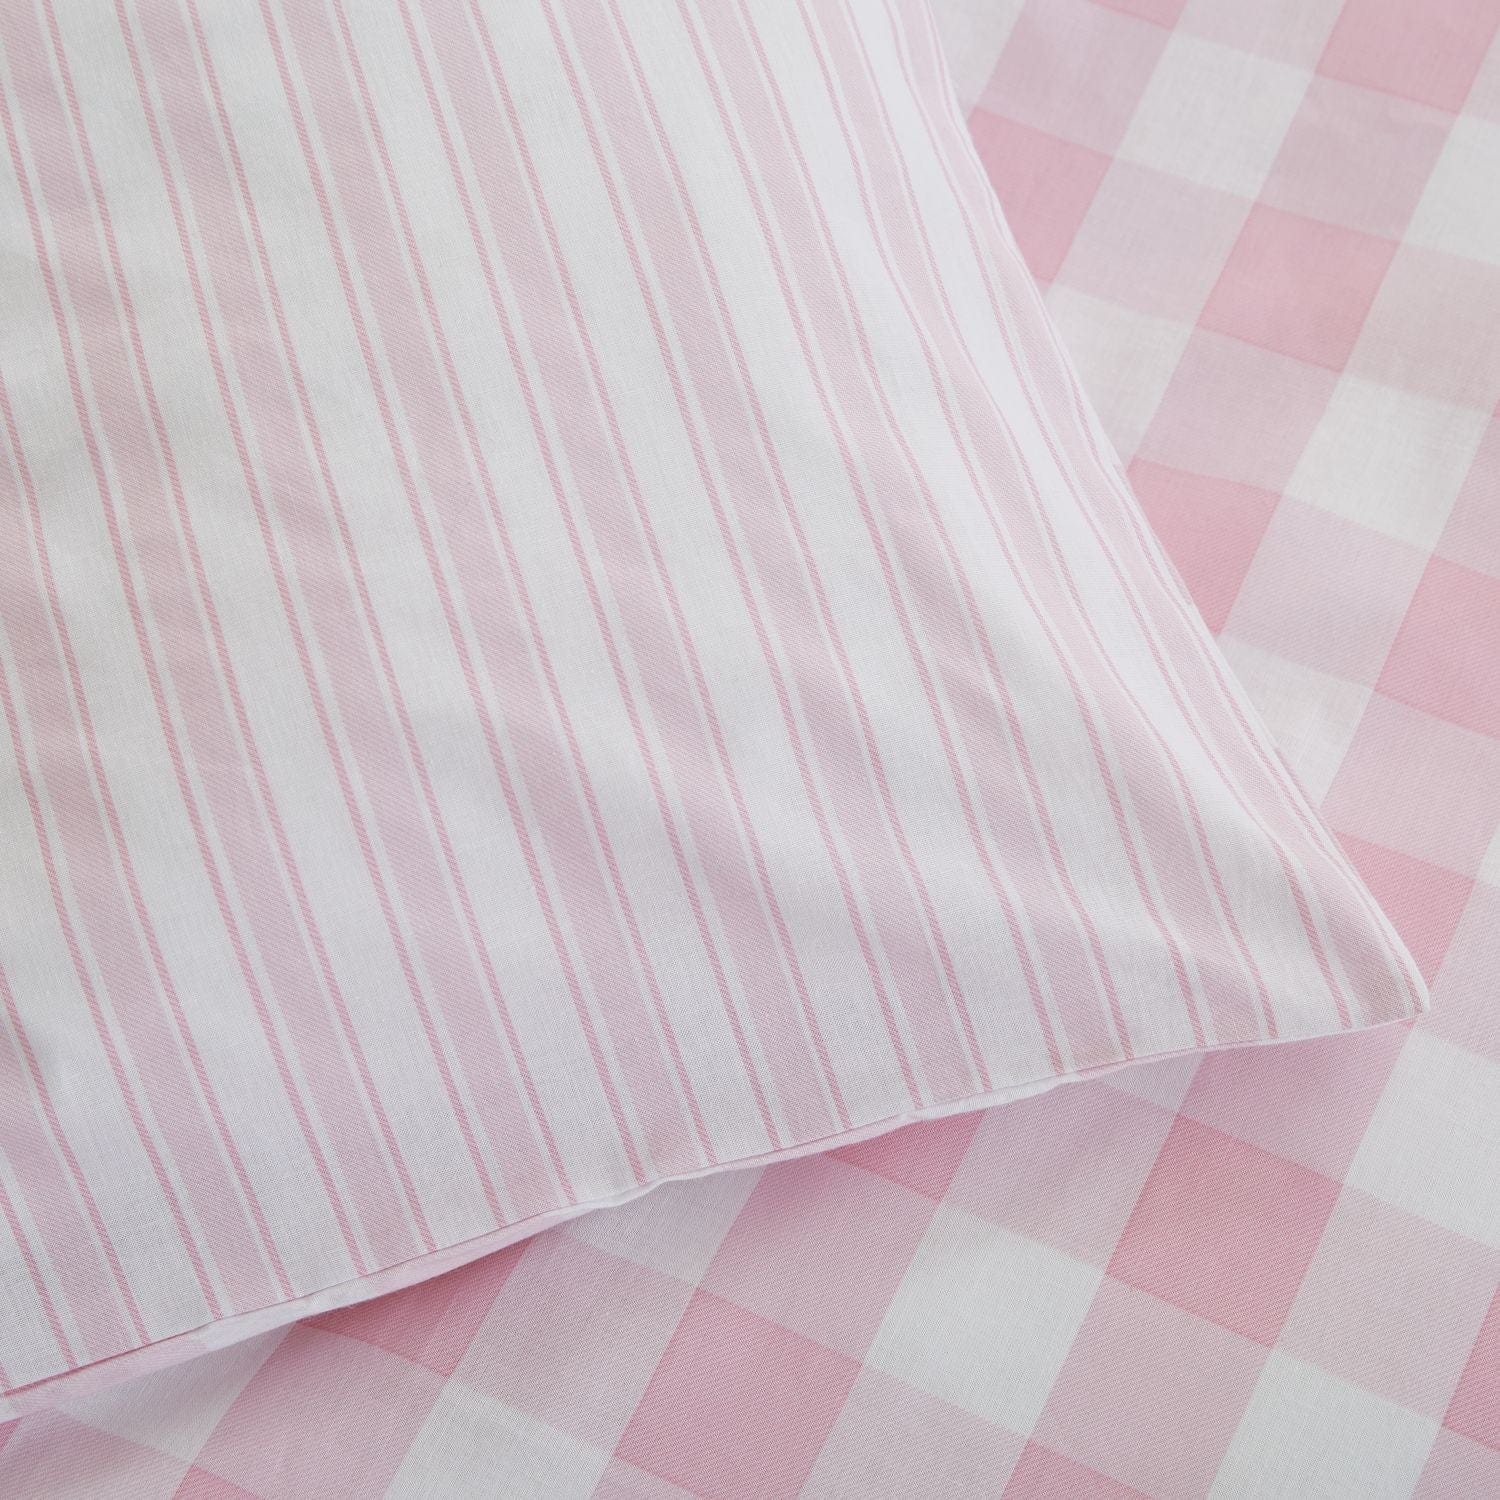 Little Bianca Bedding Check and Stripe Cotton Reversible Duvet Cover Set with Pillowcase Pink